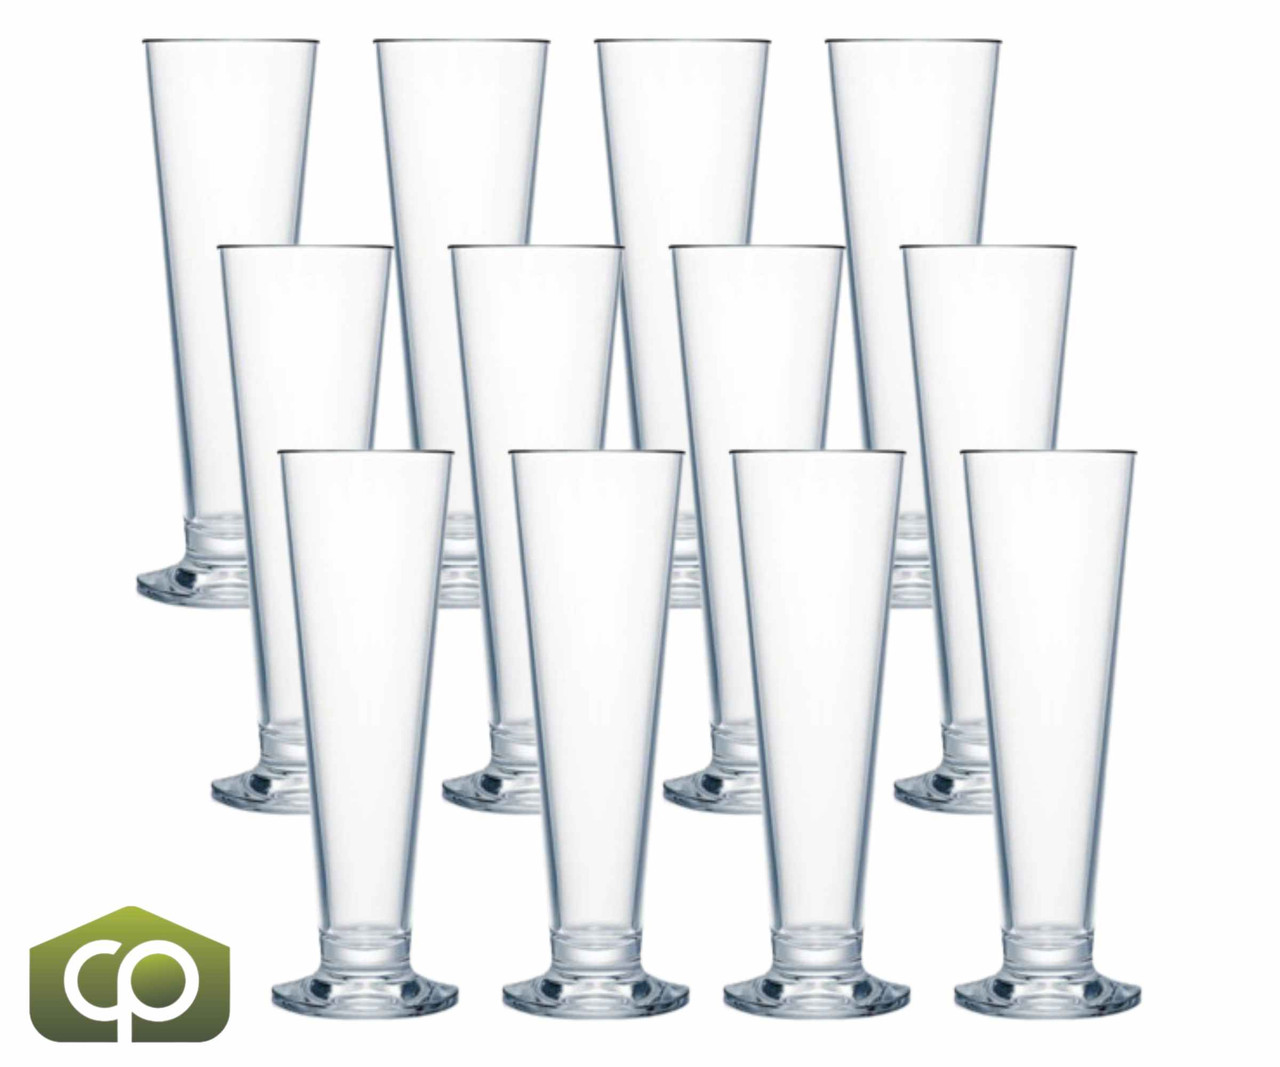 Strahl N411603 16 3/4 oz Design Footed Pilsner, Glass Like Appearance (12/Case) - Chicken Pieces